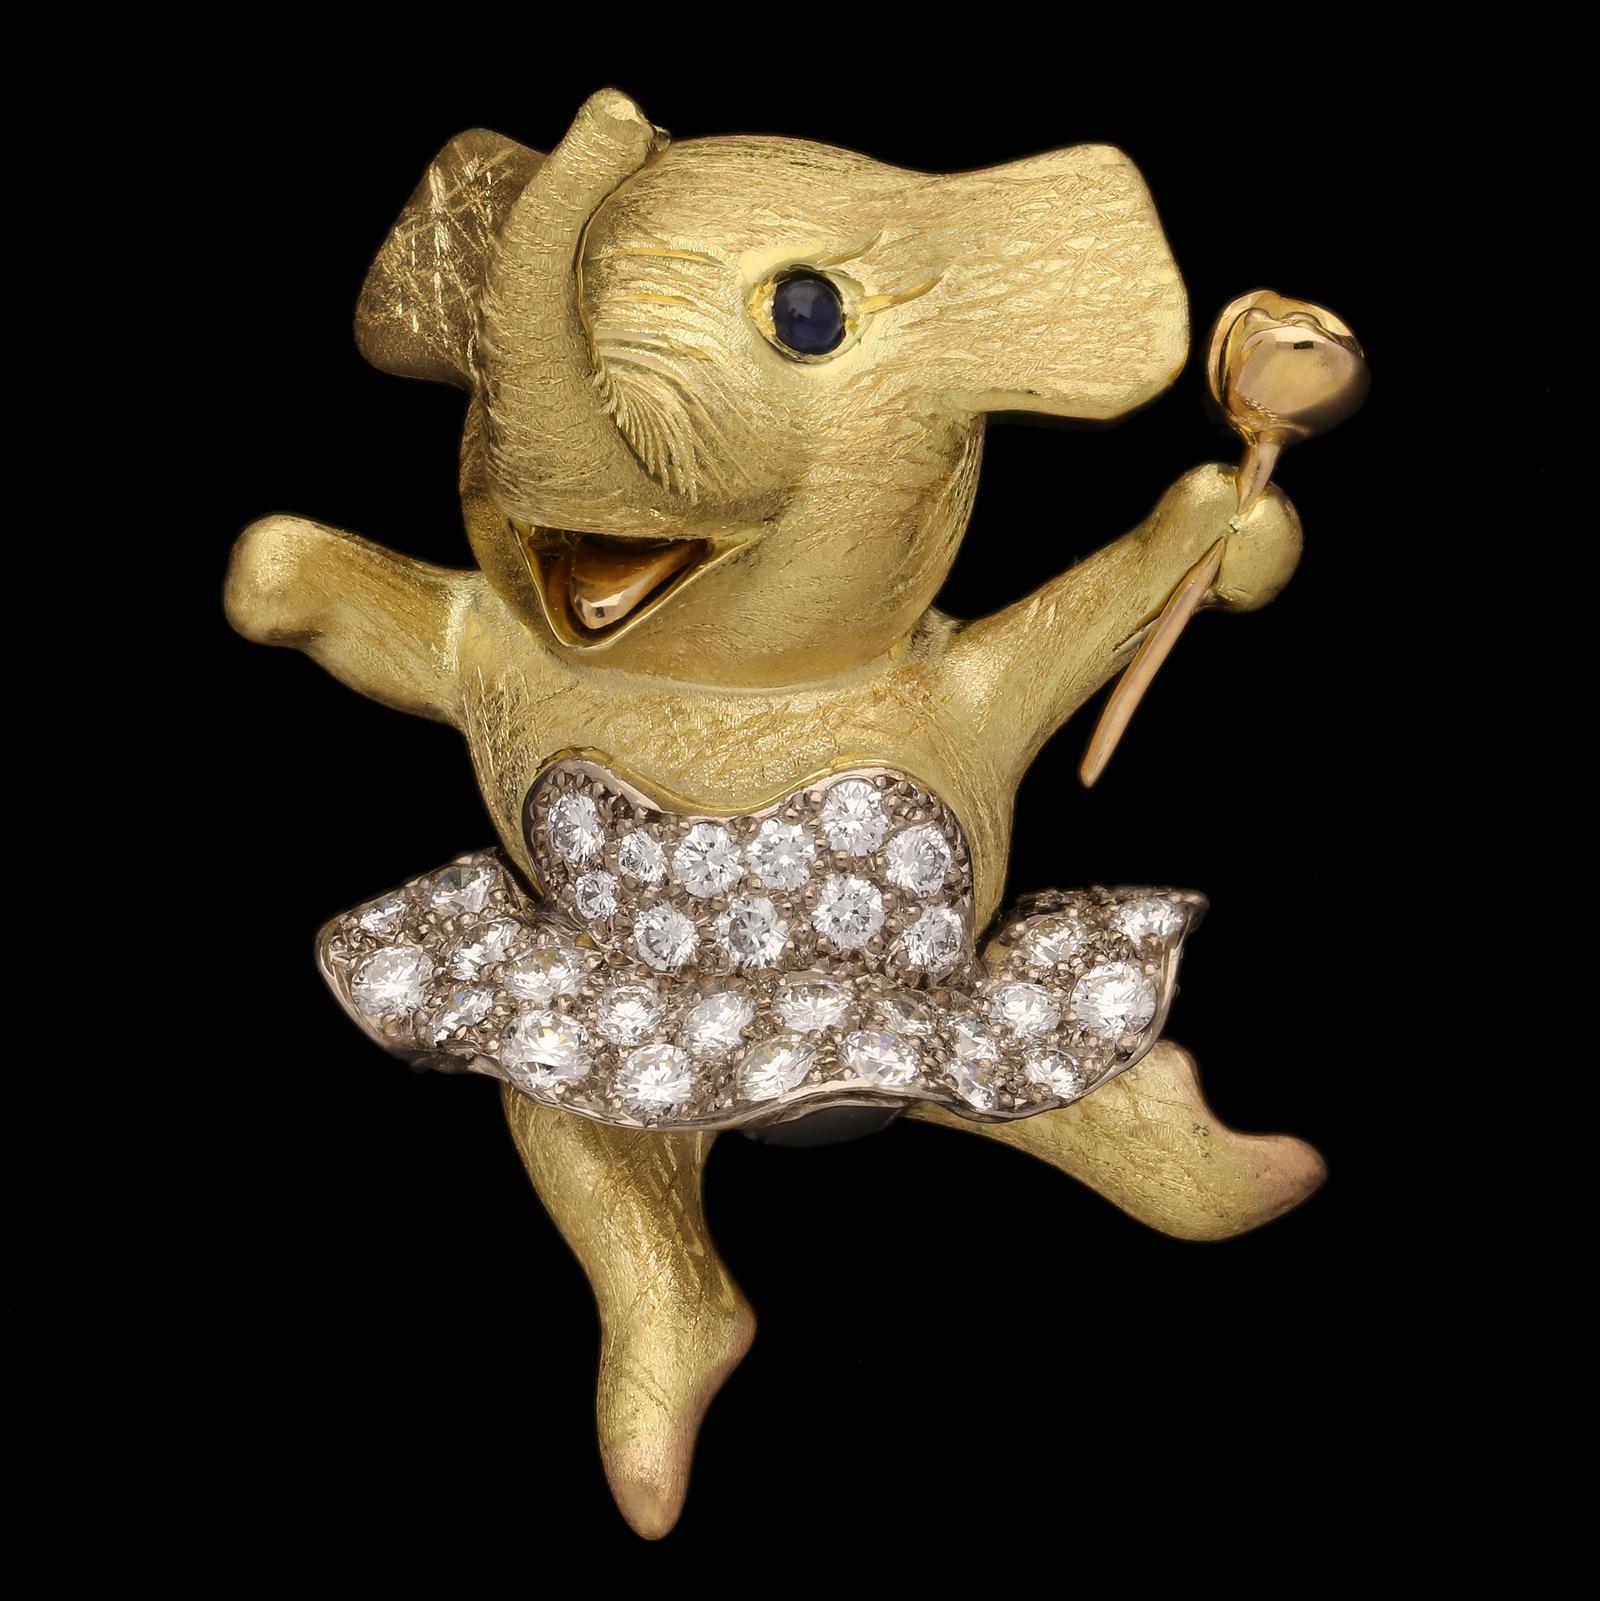 Description
A delightful elephant ballerina brooch by E.Wolfe & Co. 2021, the finely modelled elephant in 18ct yellow gold with semi-matte finely textured finish wearing a diamond set tutu and depicted leaping through the air with arms thrown wide,